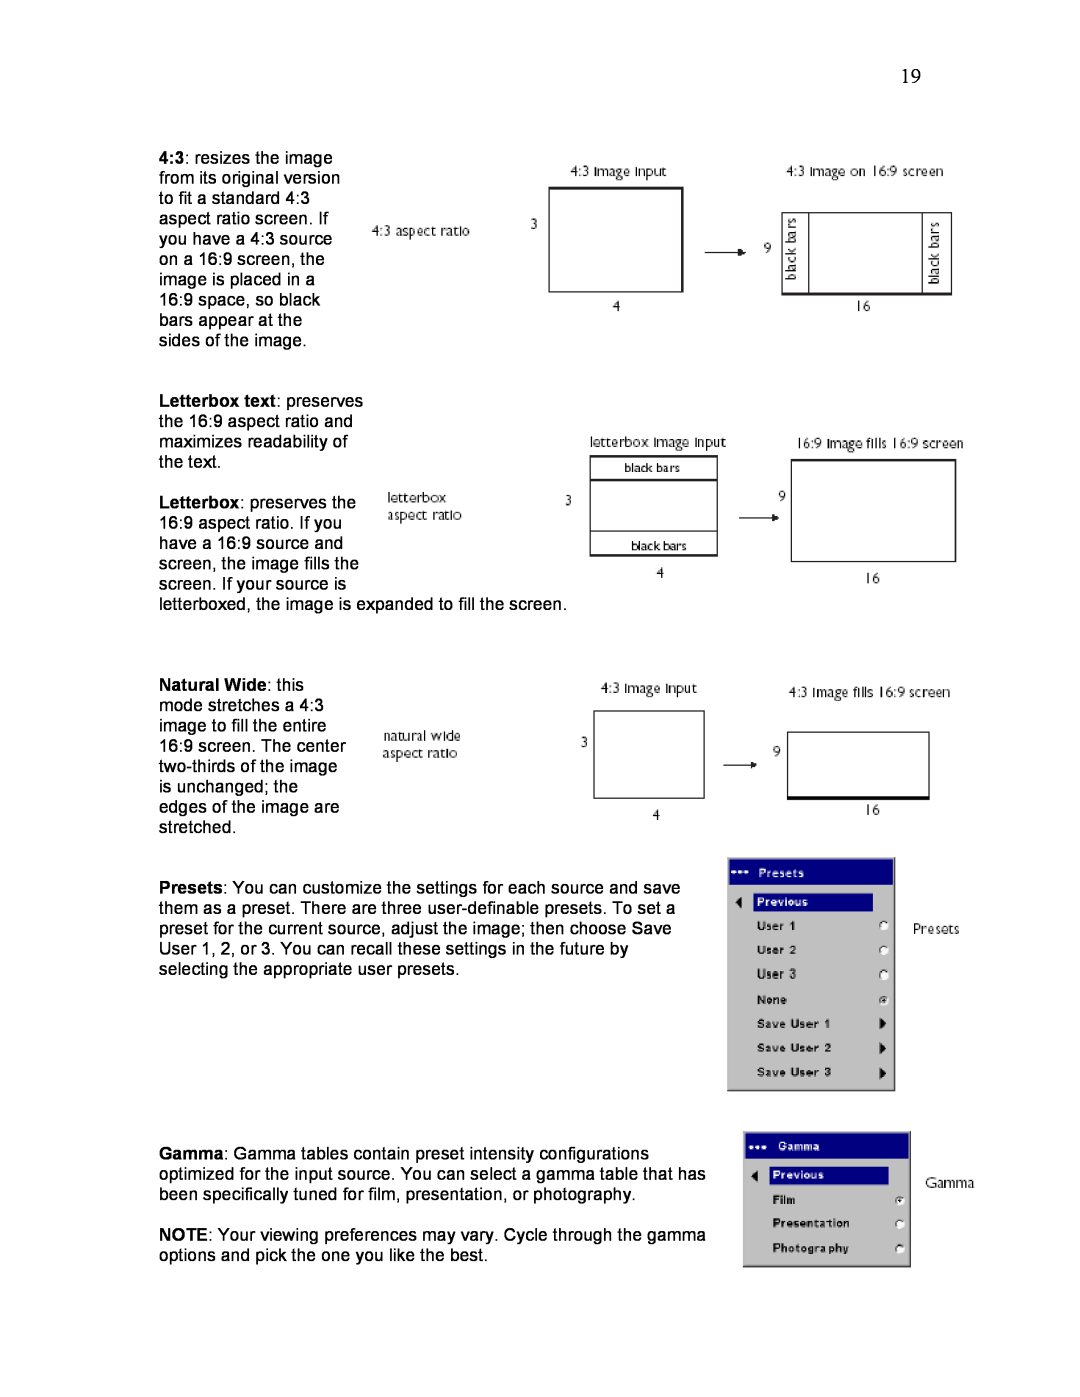 Knoll Systems HD225 user manual letterboxed, the image is expanded to fill the screen 